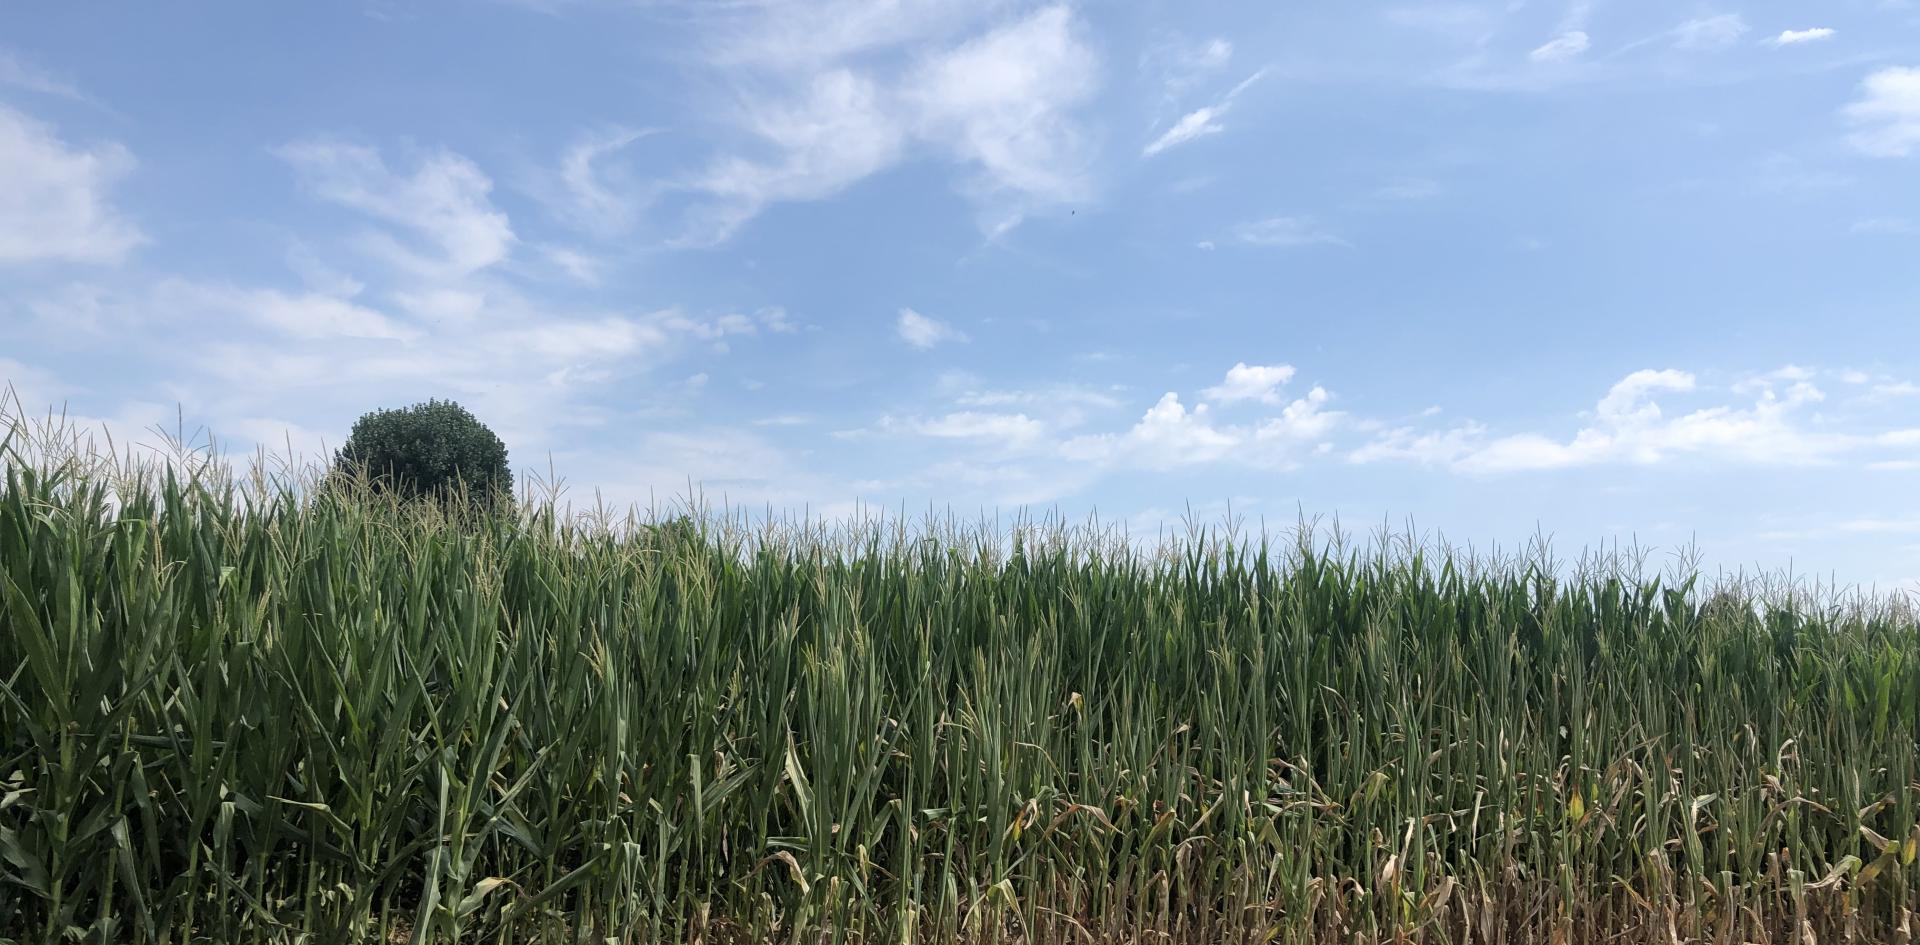 A corn crop requires a substantial amount of water, on average 500-700mm of water to complete its growth cycle.